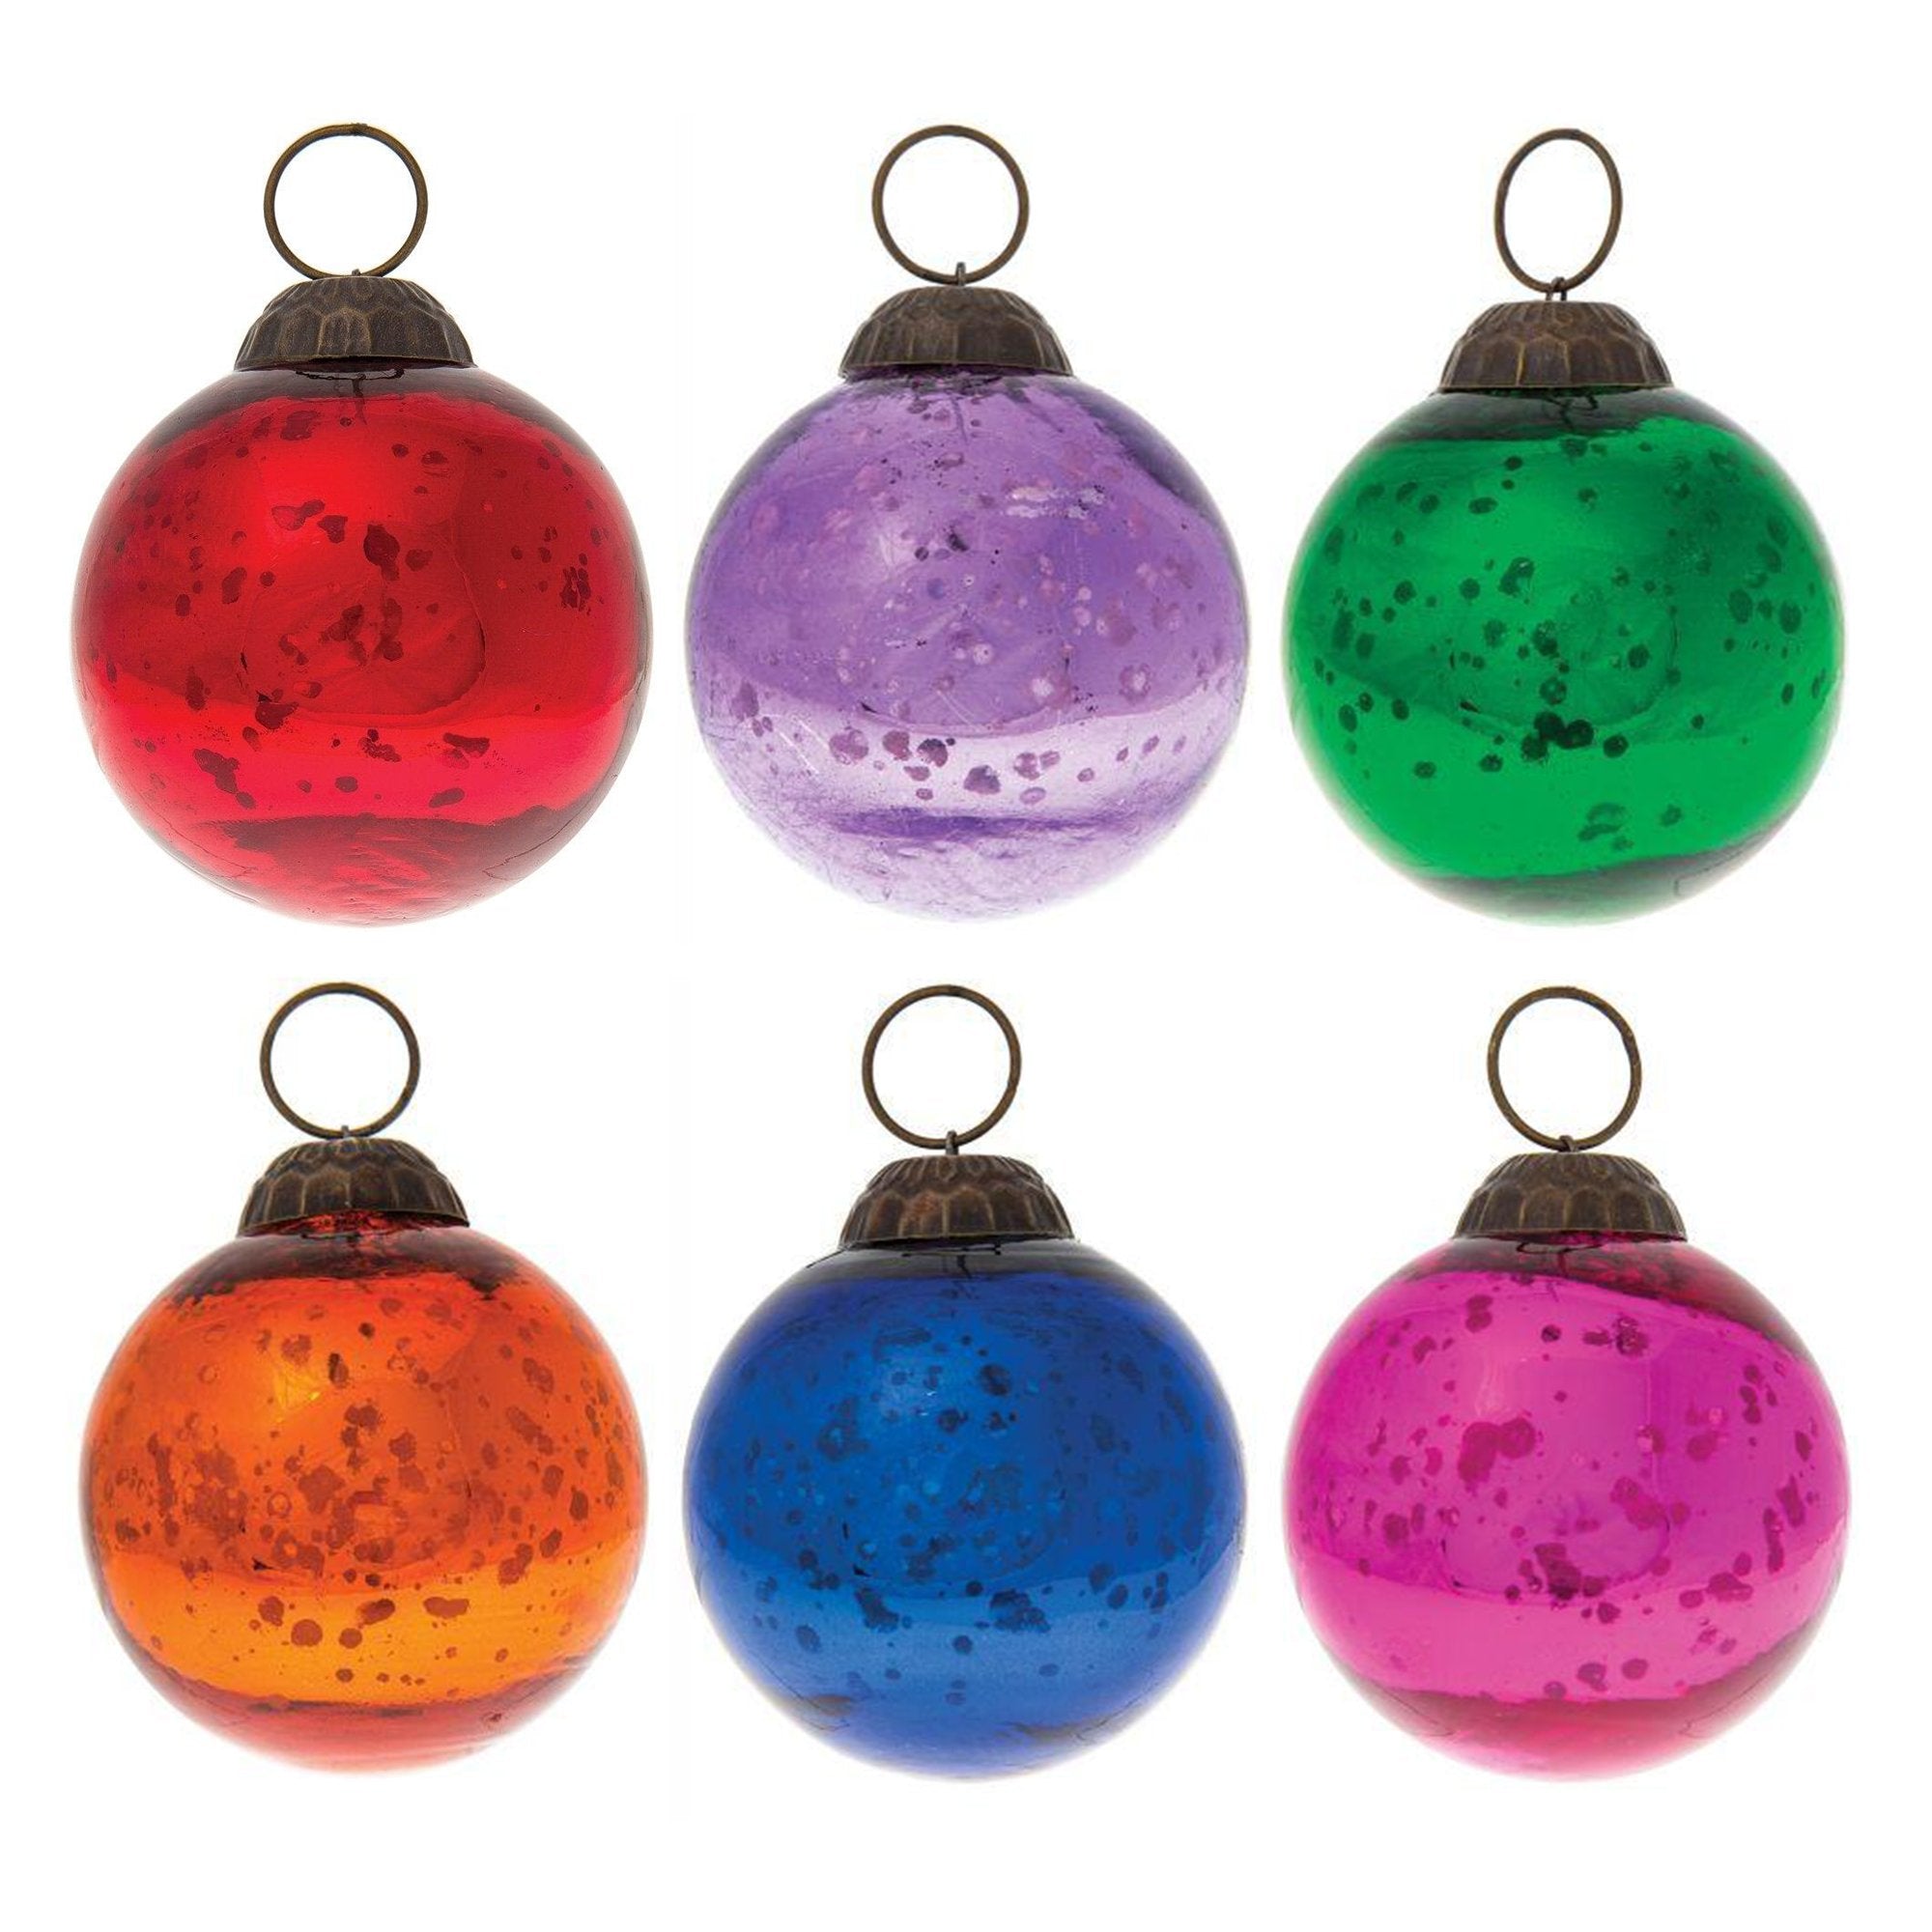 6 Pack | Multi-Color Ava Holiday Mercury Ornaments Set - Great Gift Idea, Vintage-Style Decorations for Christmas, Special Occasions, Home Decor and Parties